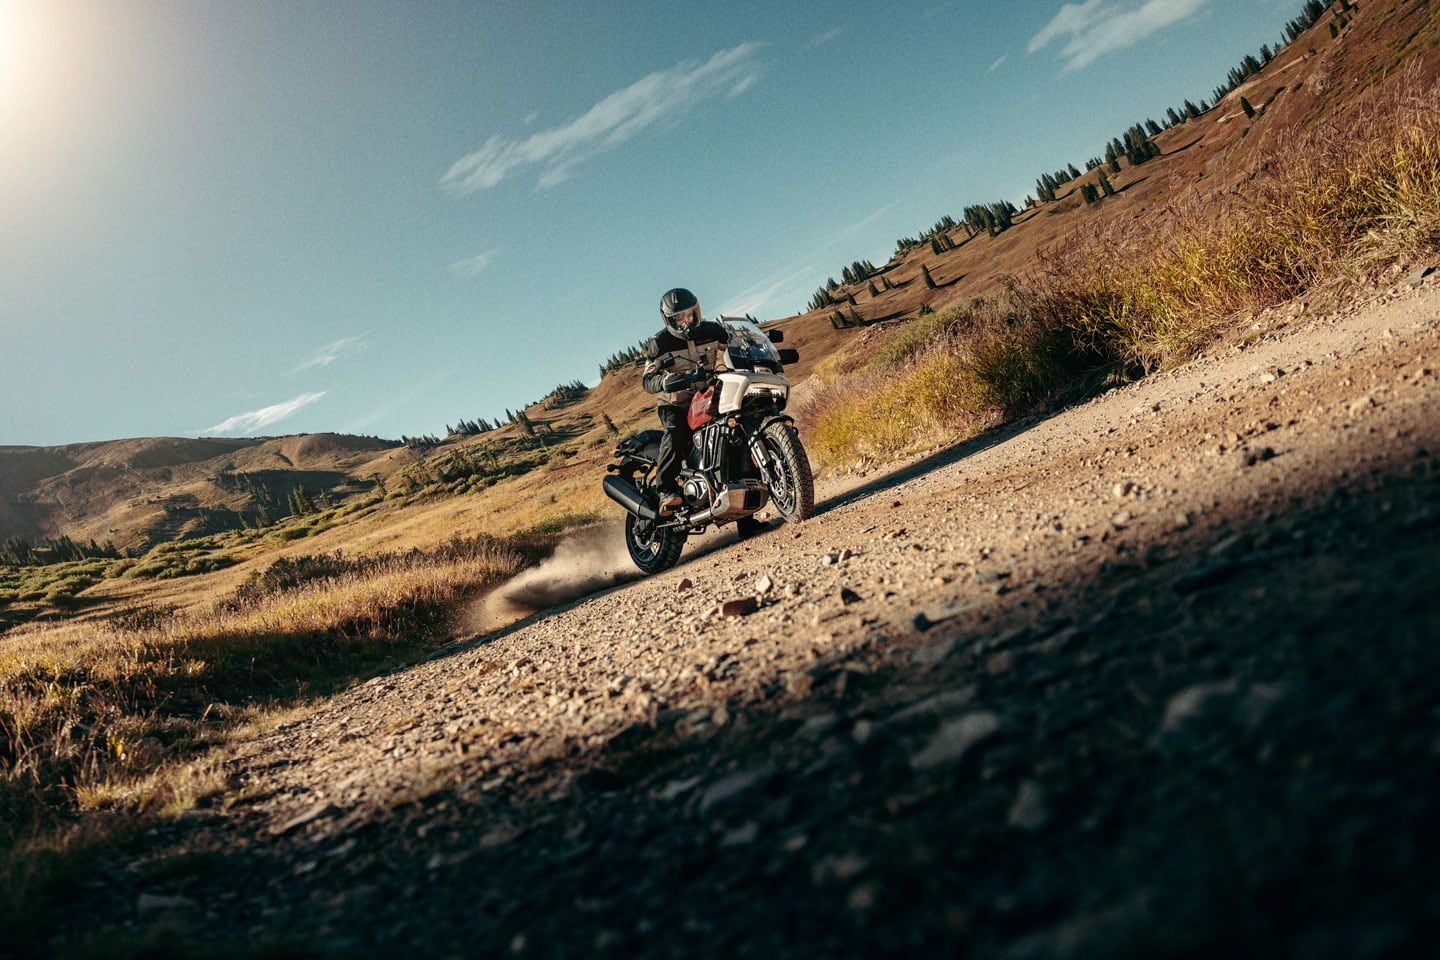 The Pan America’s lack of a quickshifter may not be a deal breaker for most riders, but it’s certainly an omission on a motorcycle in the open-class ADV-tourer category.